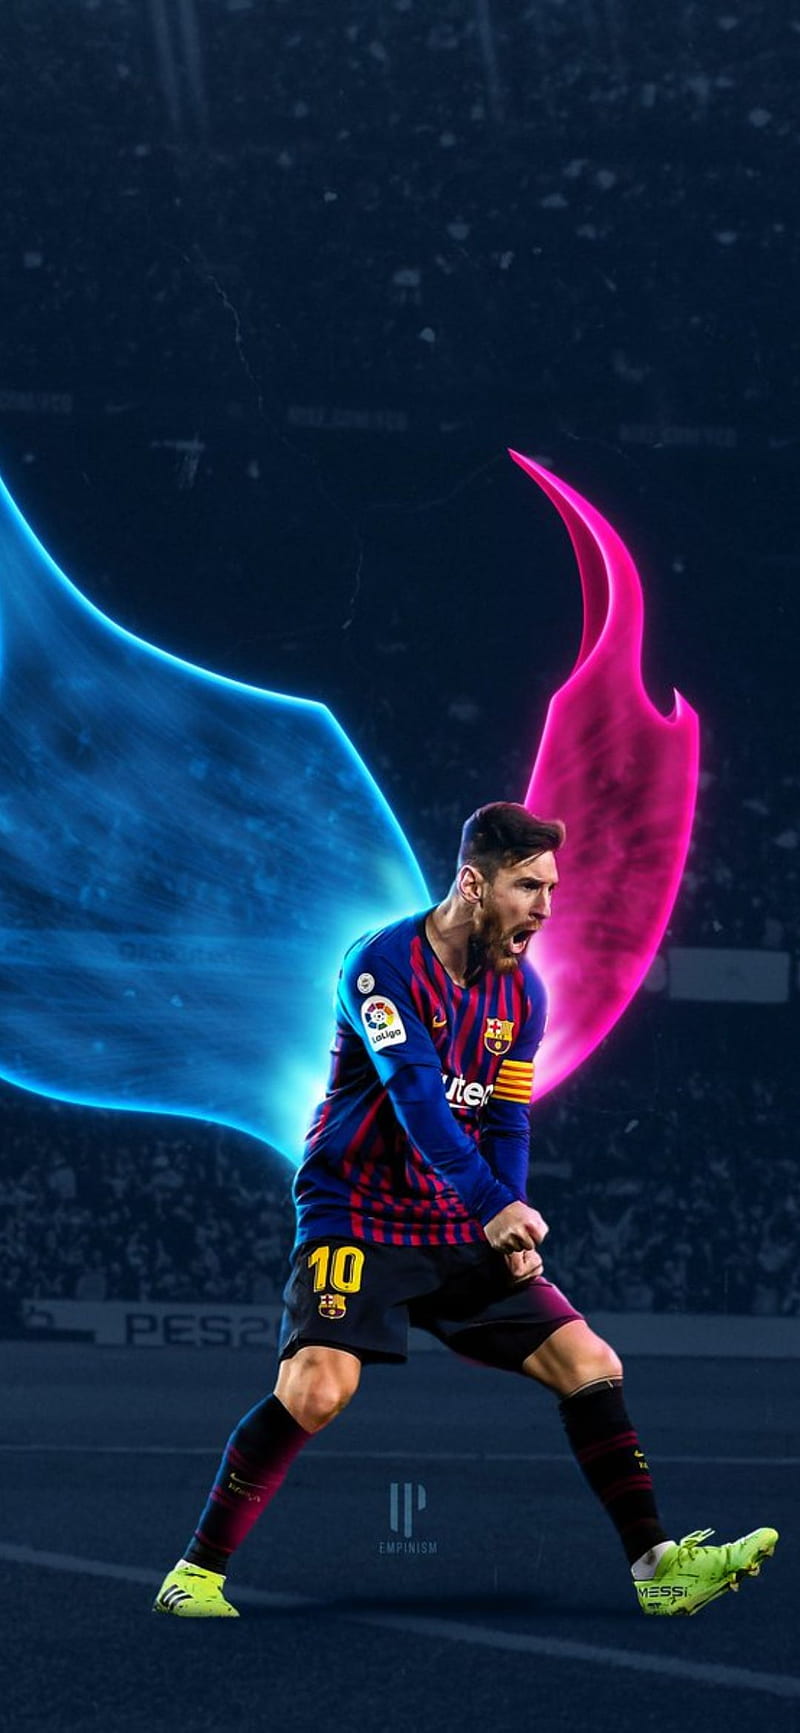 Lionel Messi 2016 wallpaper edit by subhan22 on DeviantArt